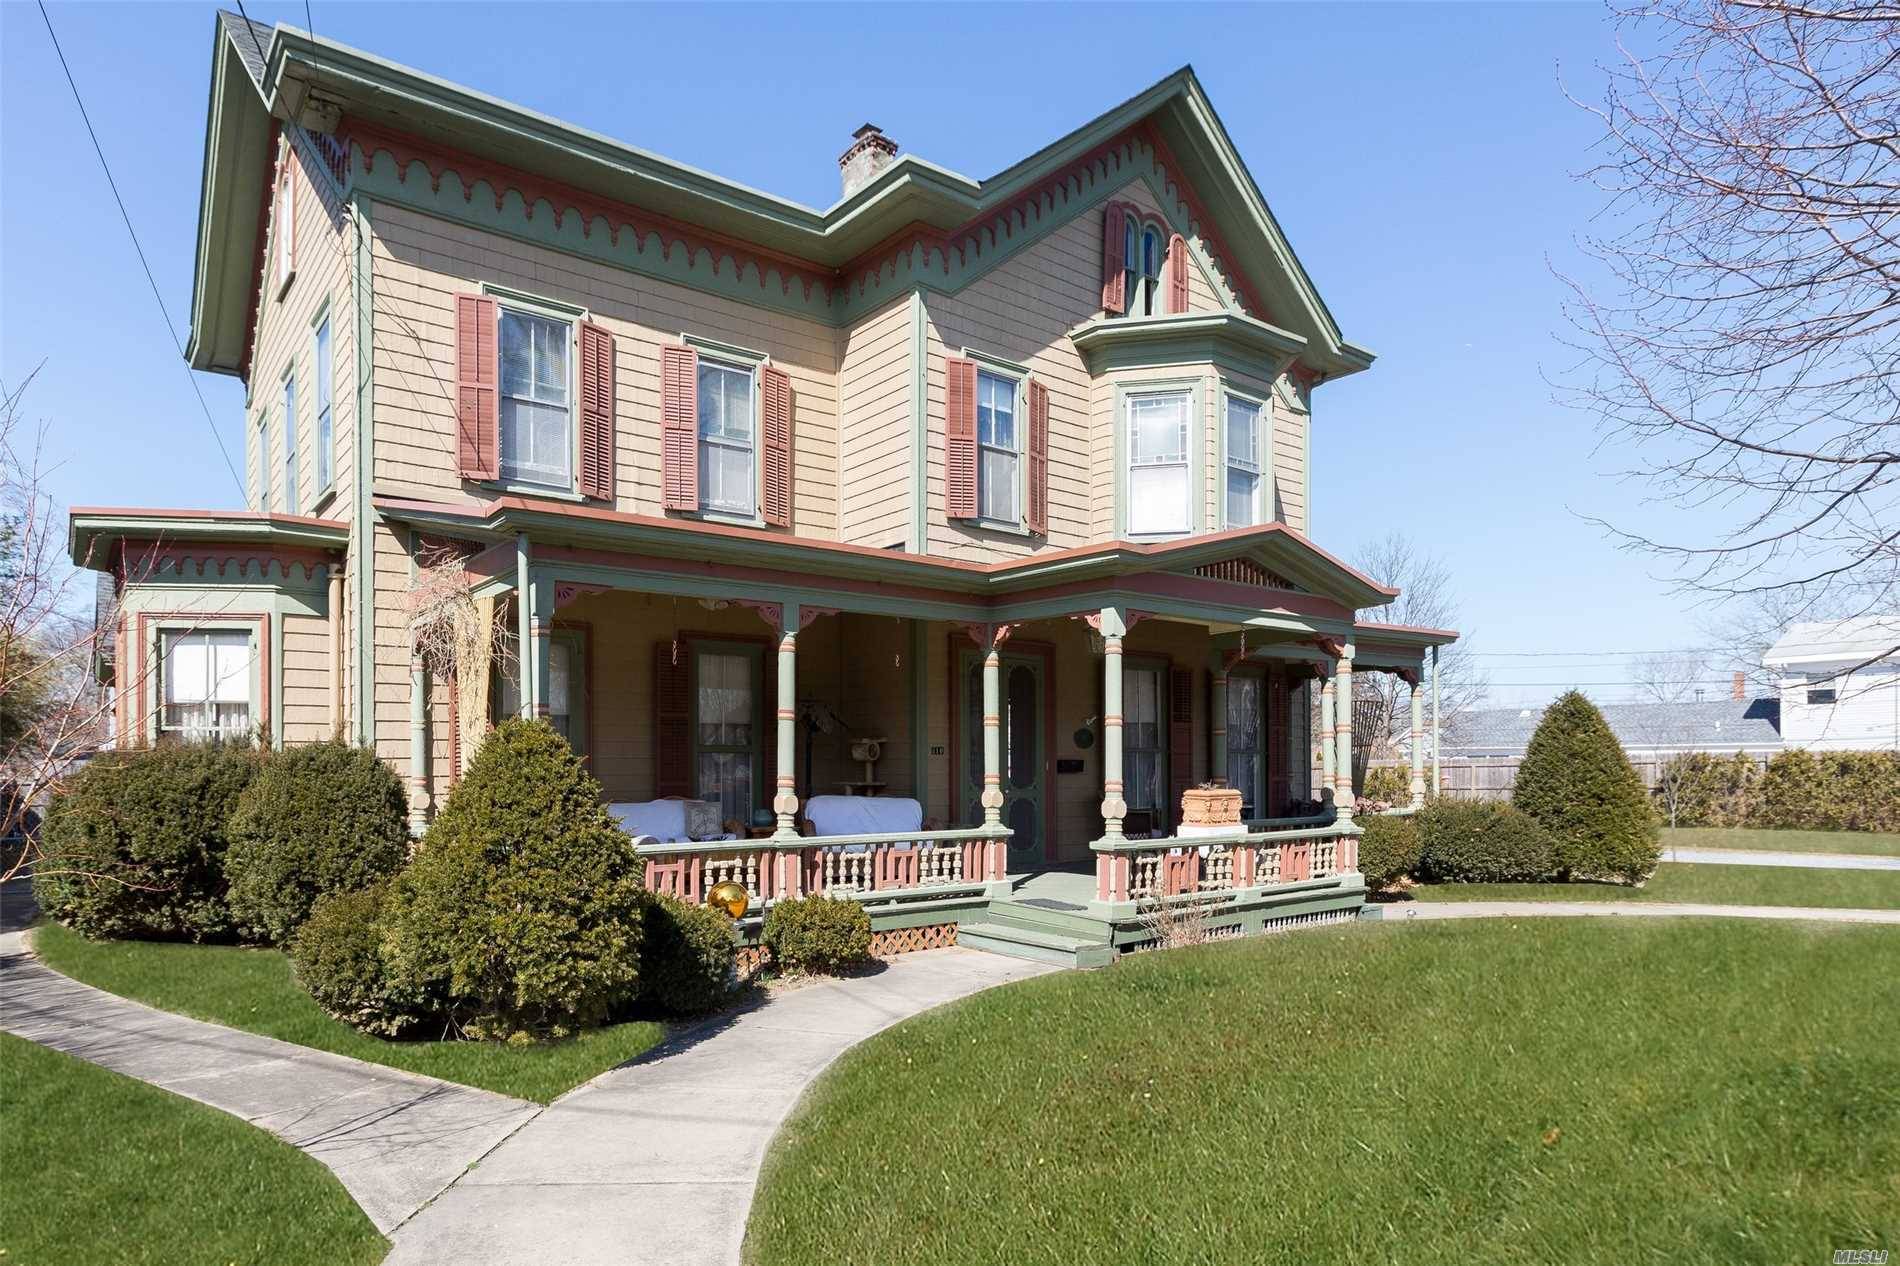 Must see Beautiful Victorian Home Situated in the Heart of Riverhead in the Court District.